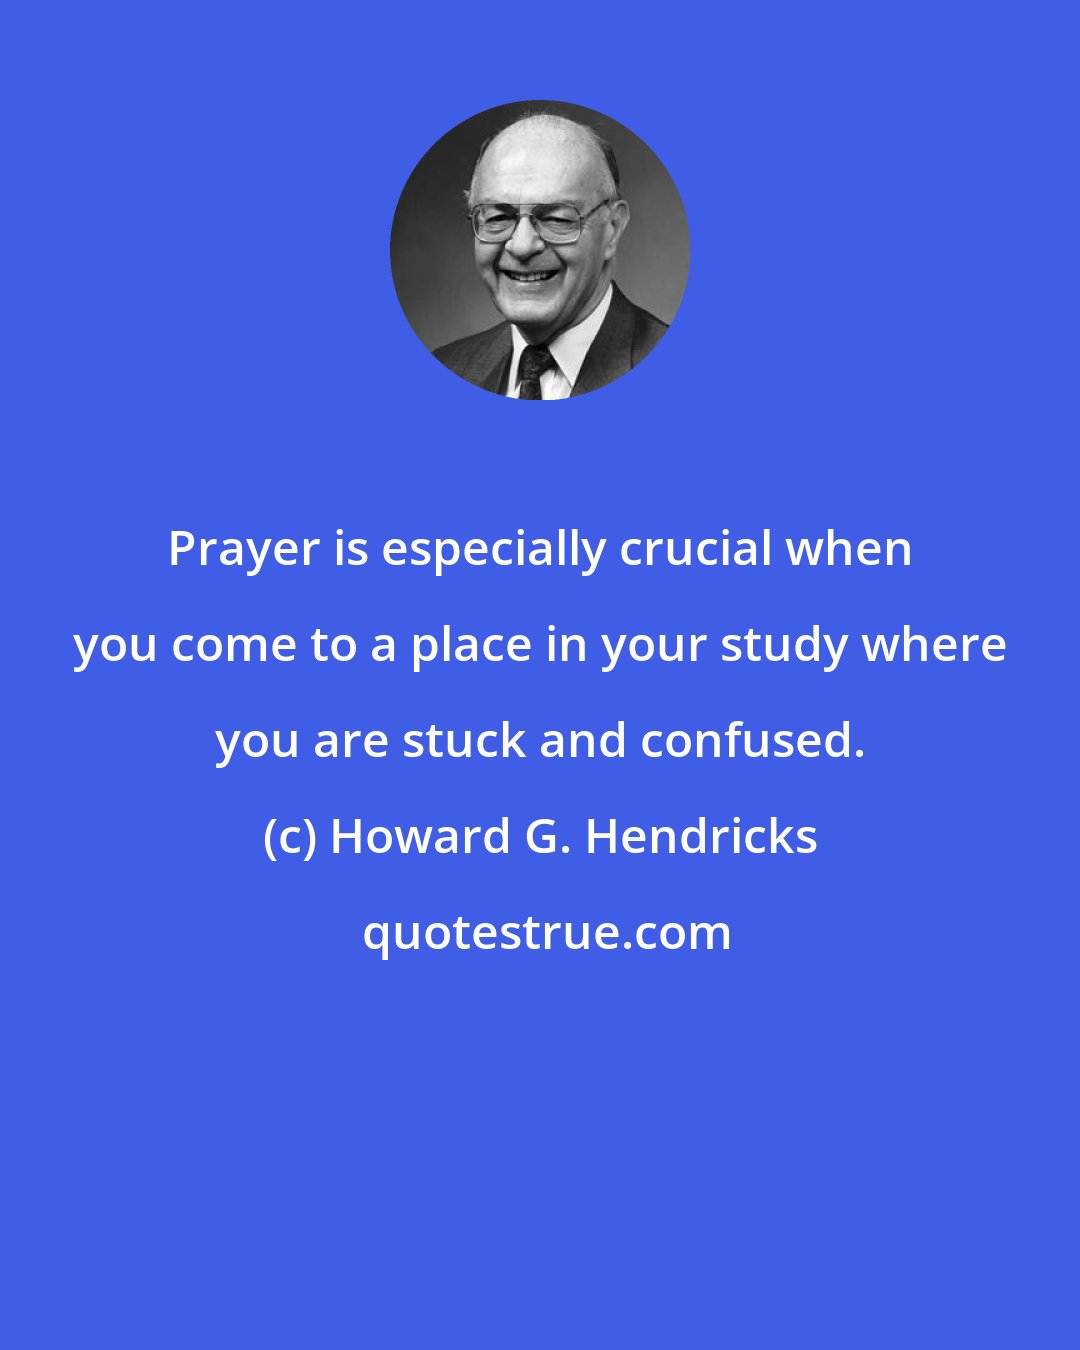 Howard G. Hendricks: Prayer is especially crucial when you come to a place in your study where you are stuck and confused.